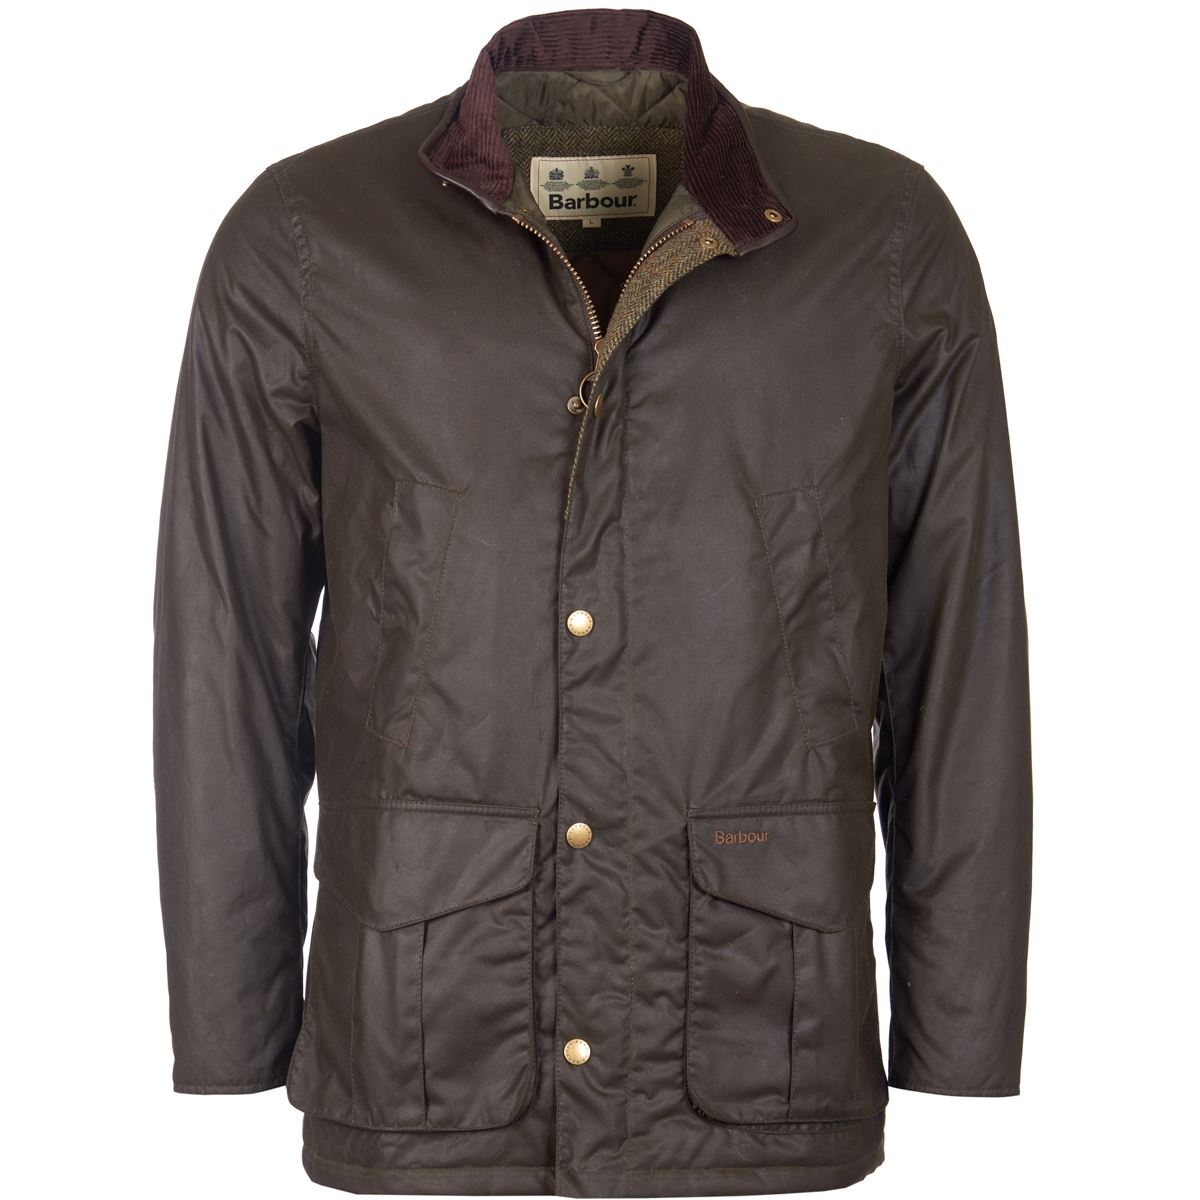 Is the Barbour Hereford jacket in high demand?